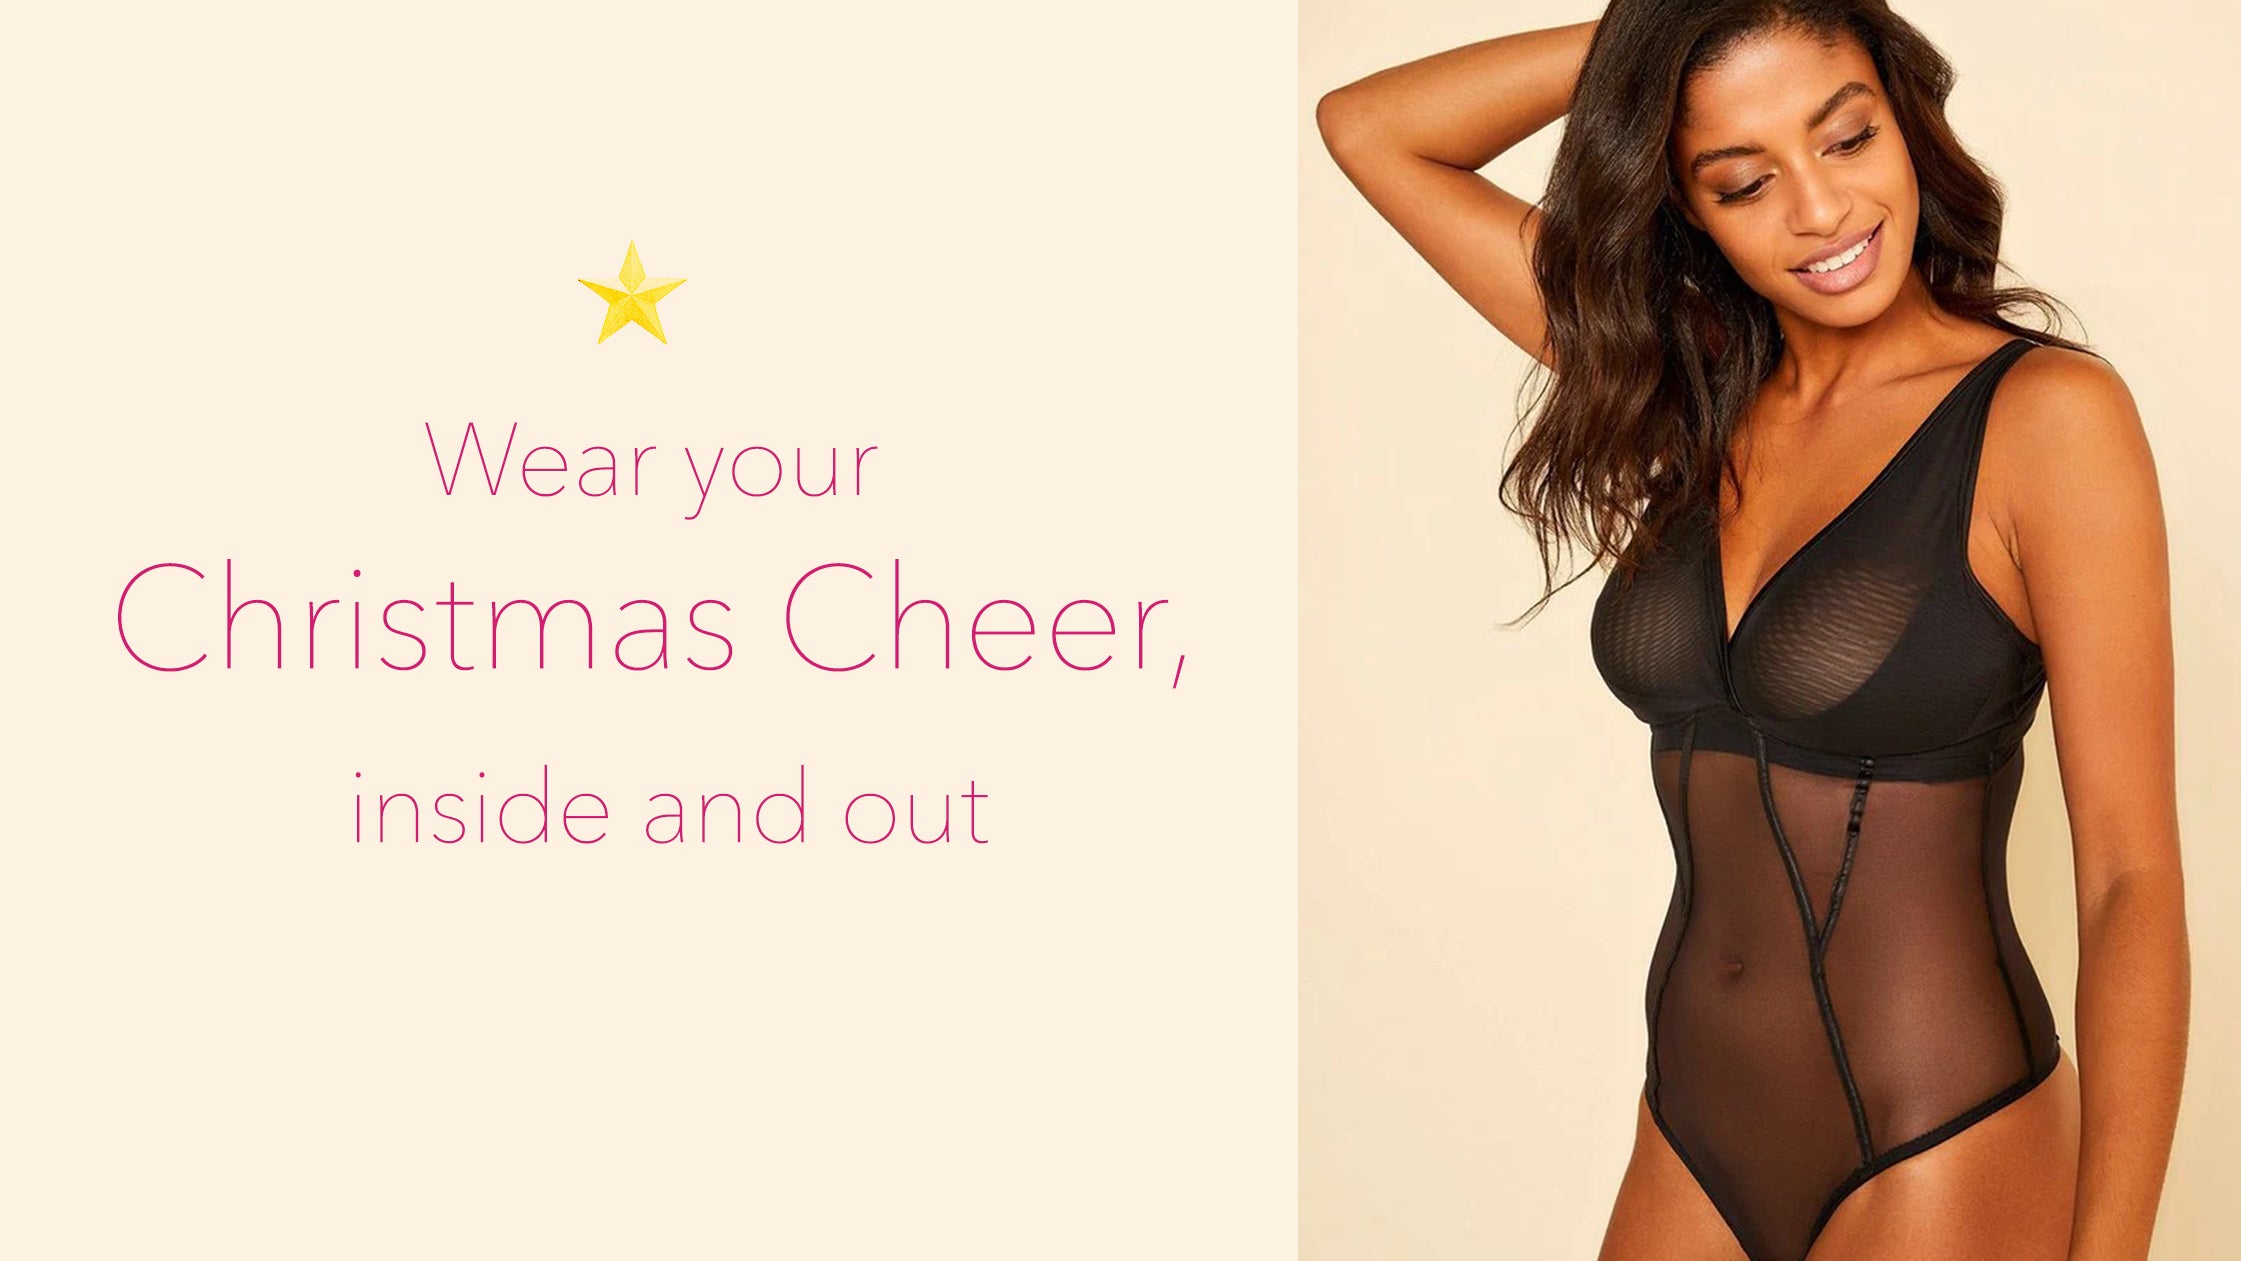 Wear your Christmas Cheer, inside and out